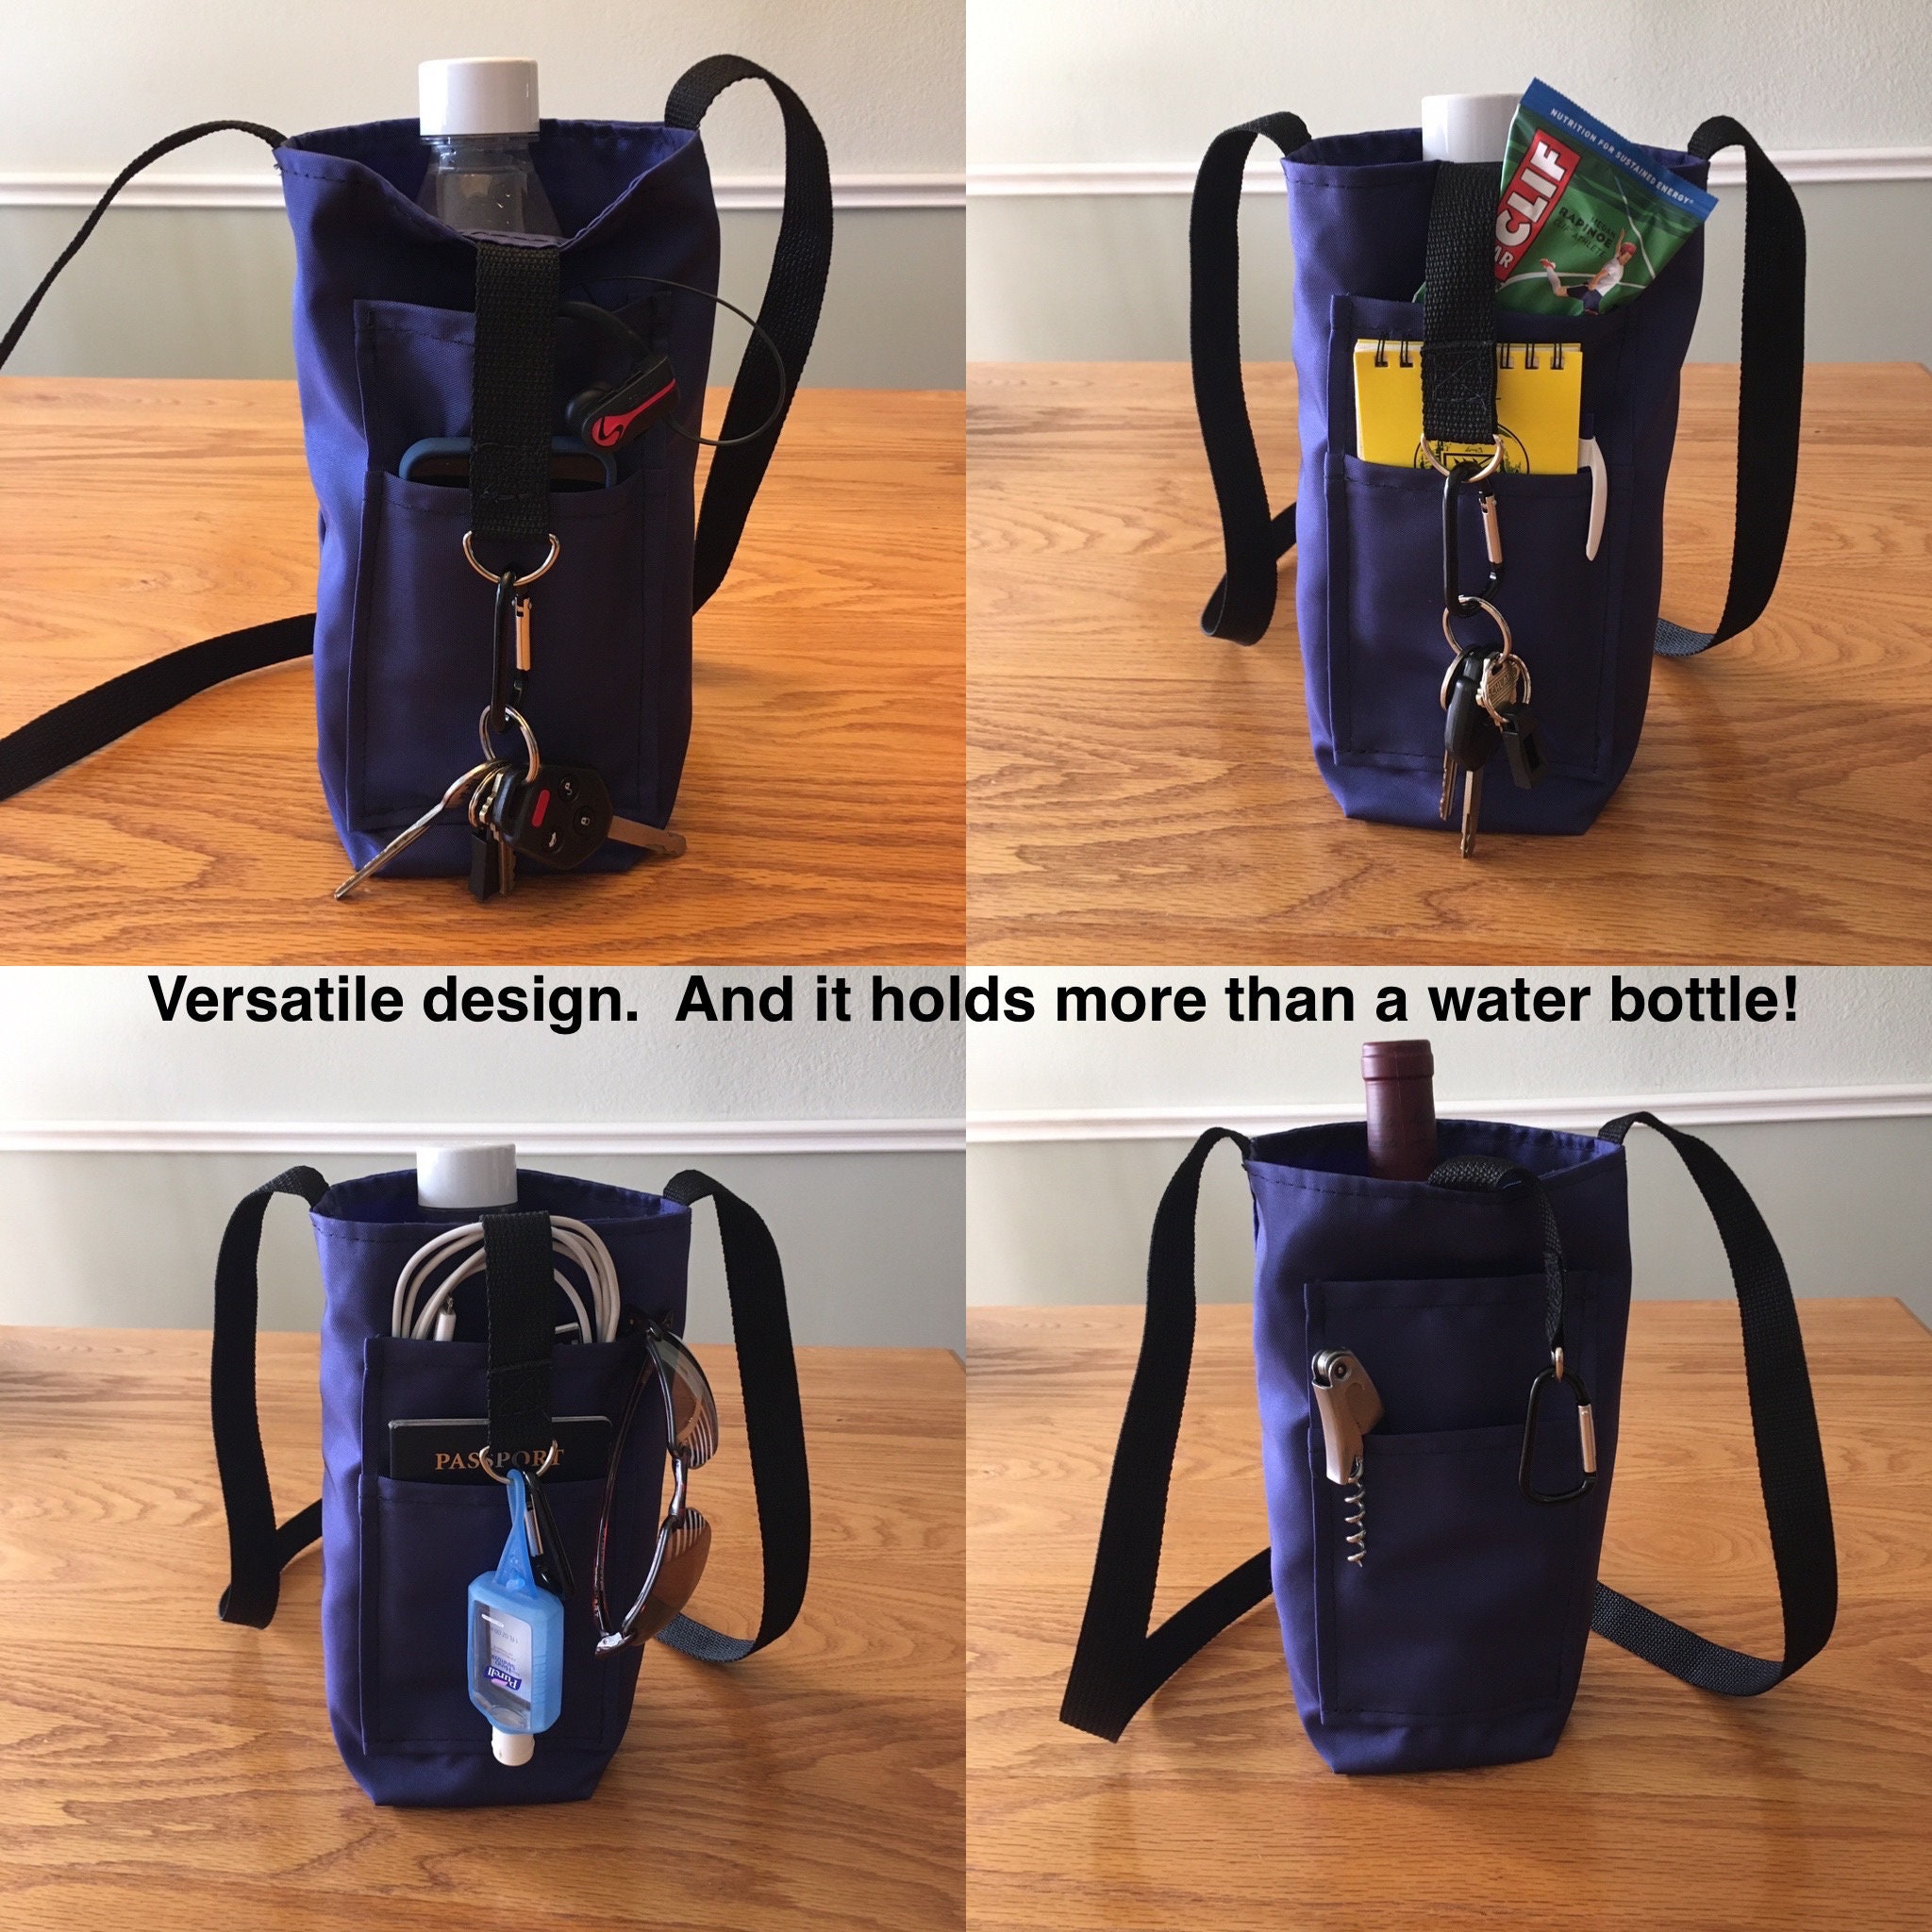 Water Bottle Carrier Bags with Adjustable Shoulder Strap Insulated Crossbody Water Bottle Holder Sports Water Bottle Case Sleeve Pouch with 2 Pocket